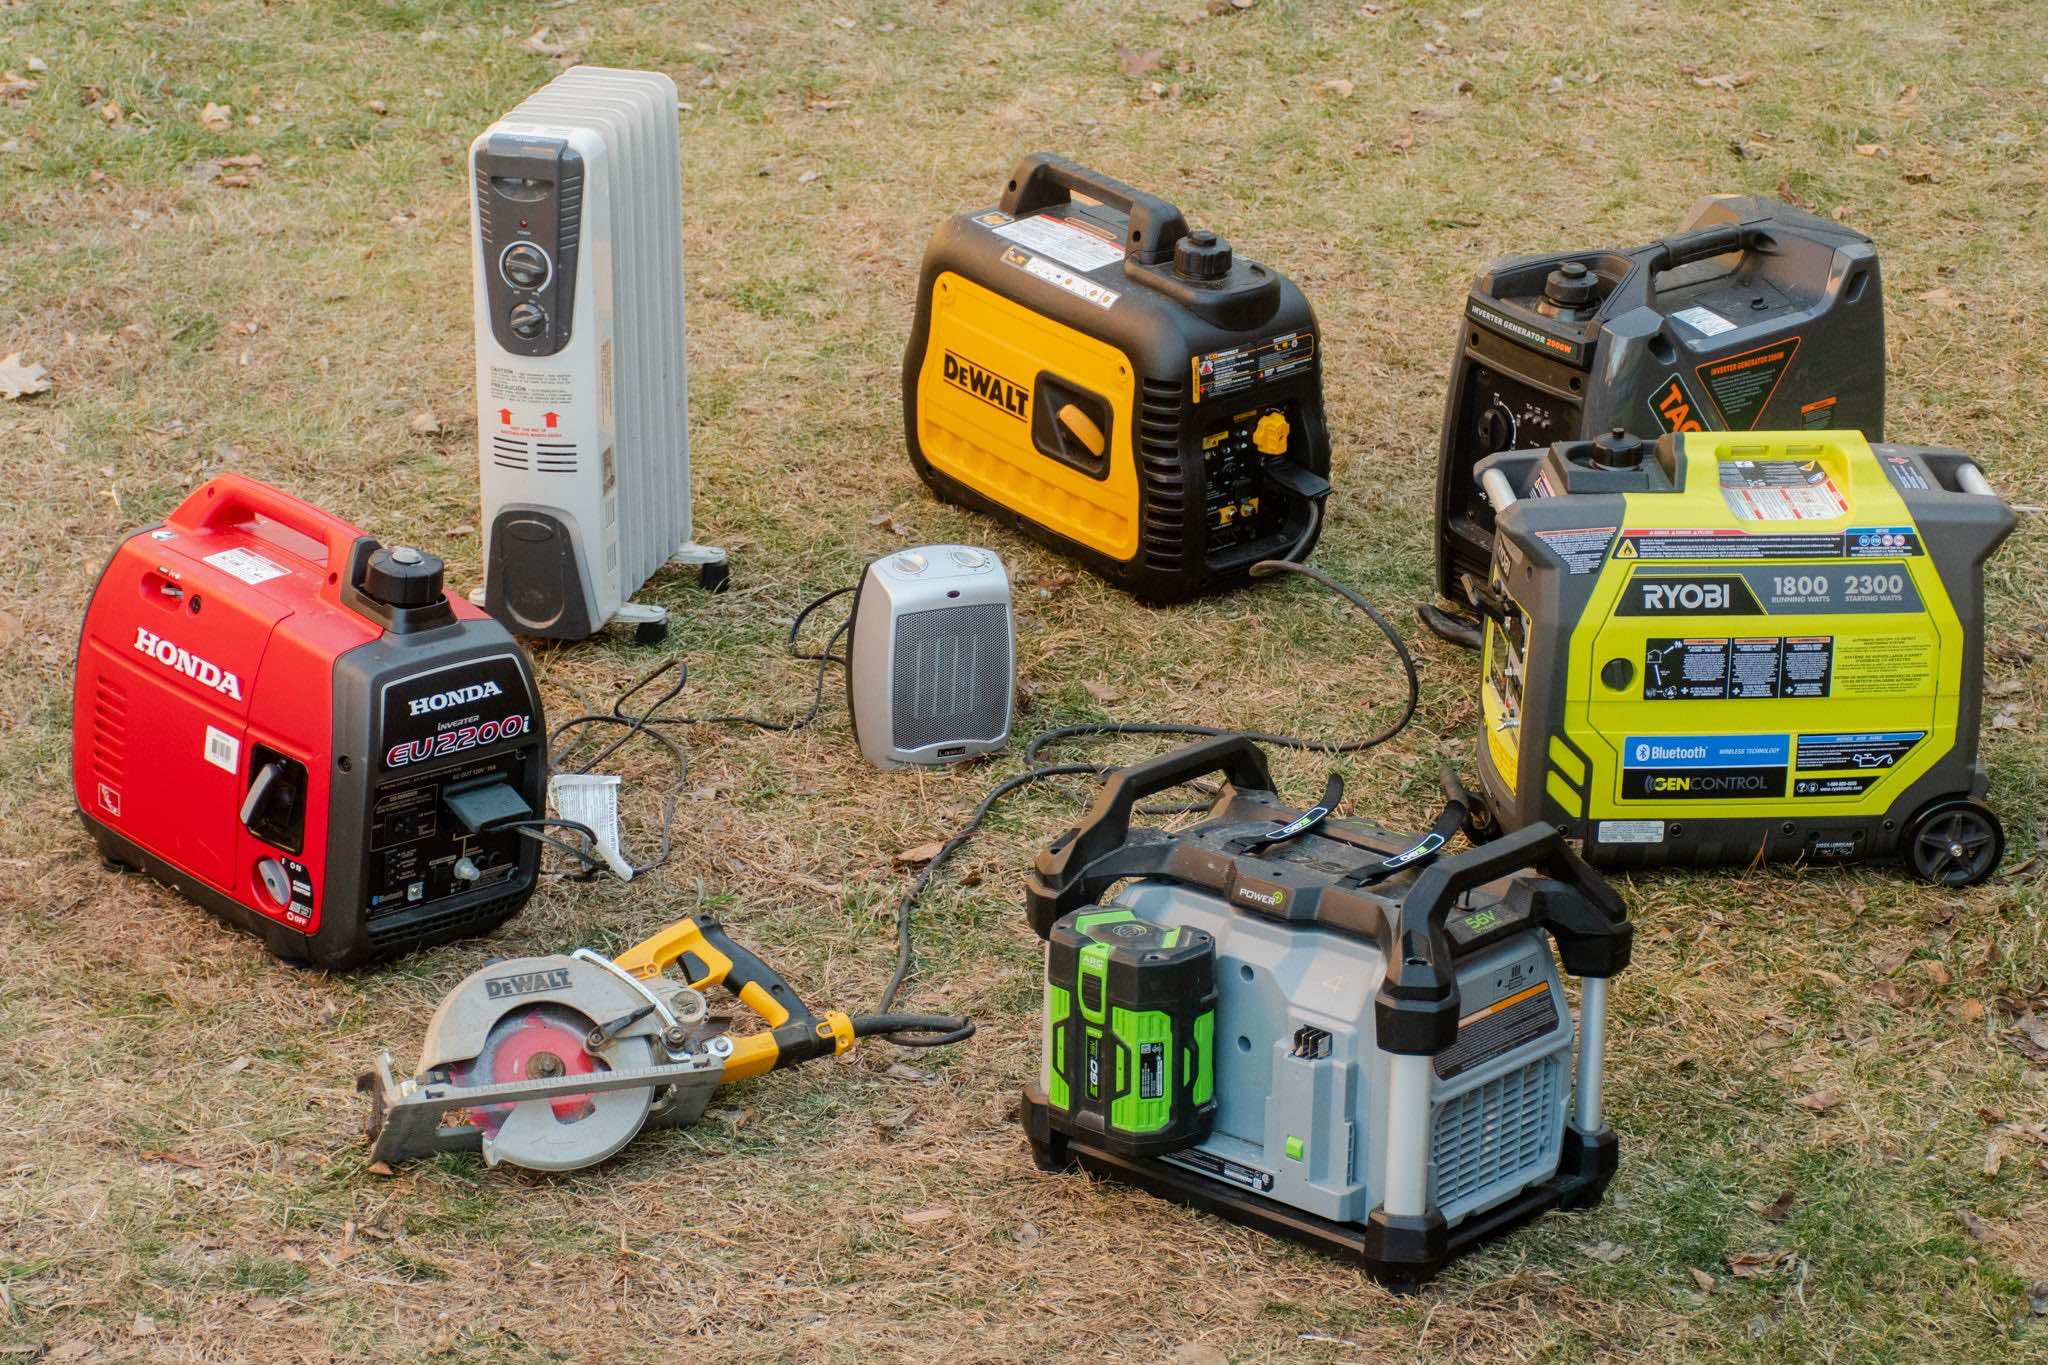 A selection of portable generators for use on the boat